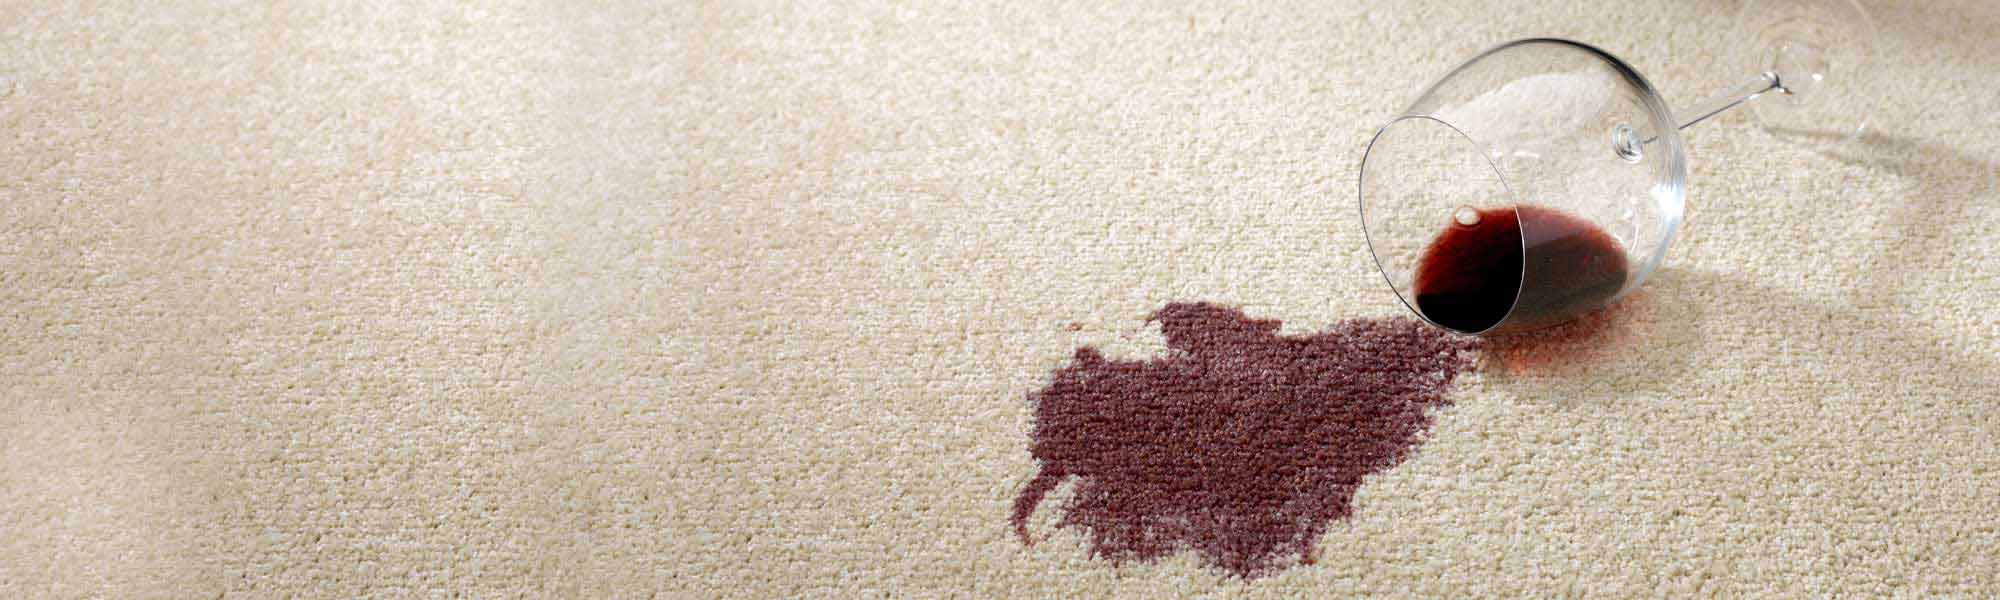 Professional Stain Removal Service by Ambassador Chem-Dry